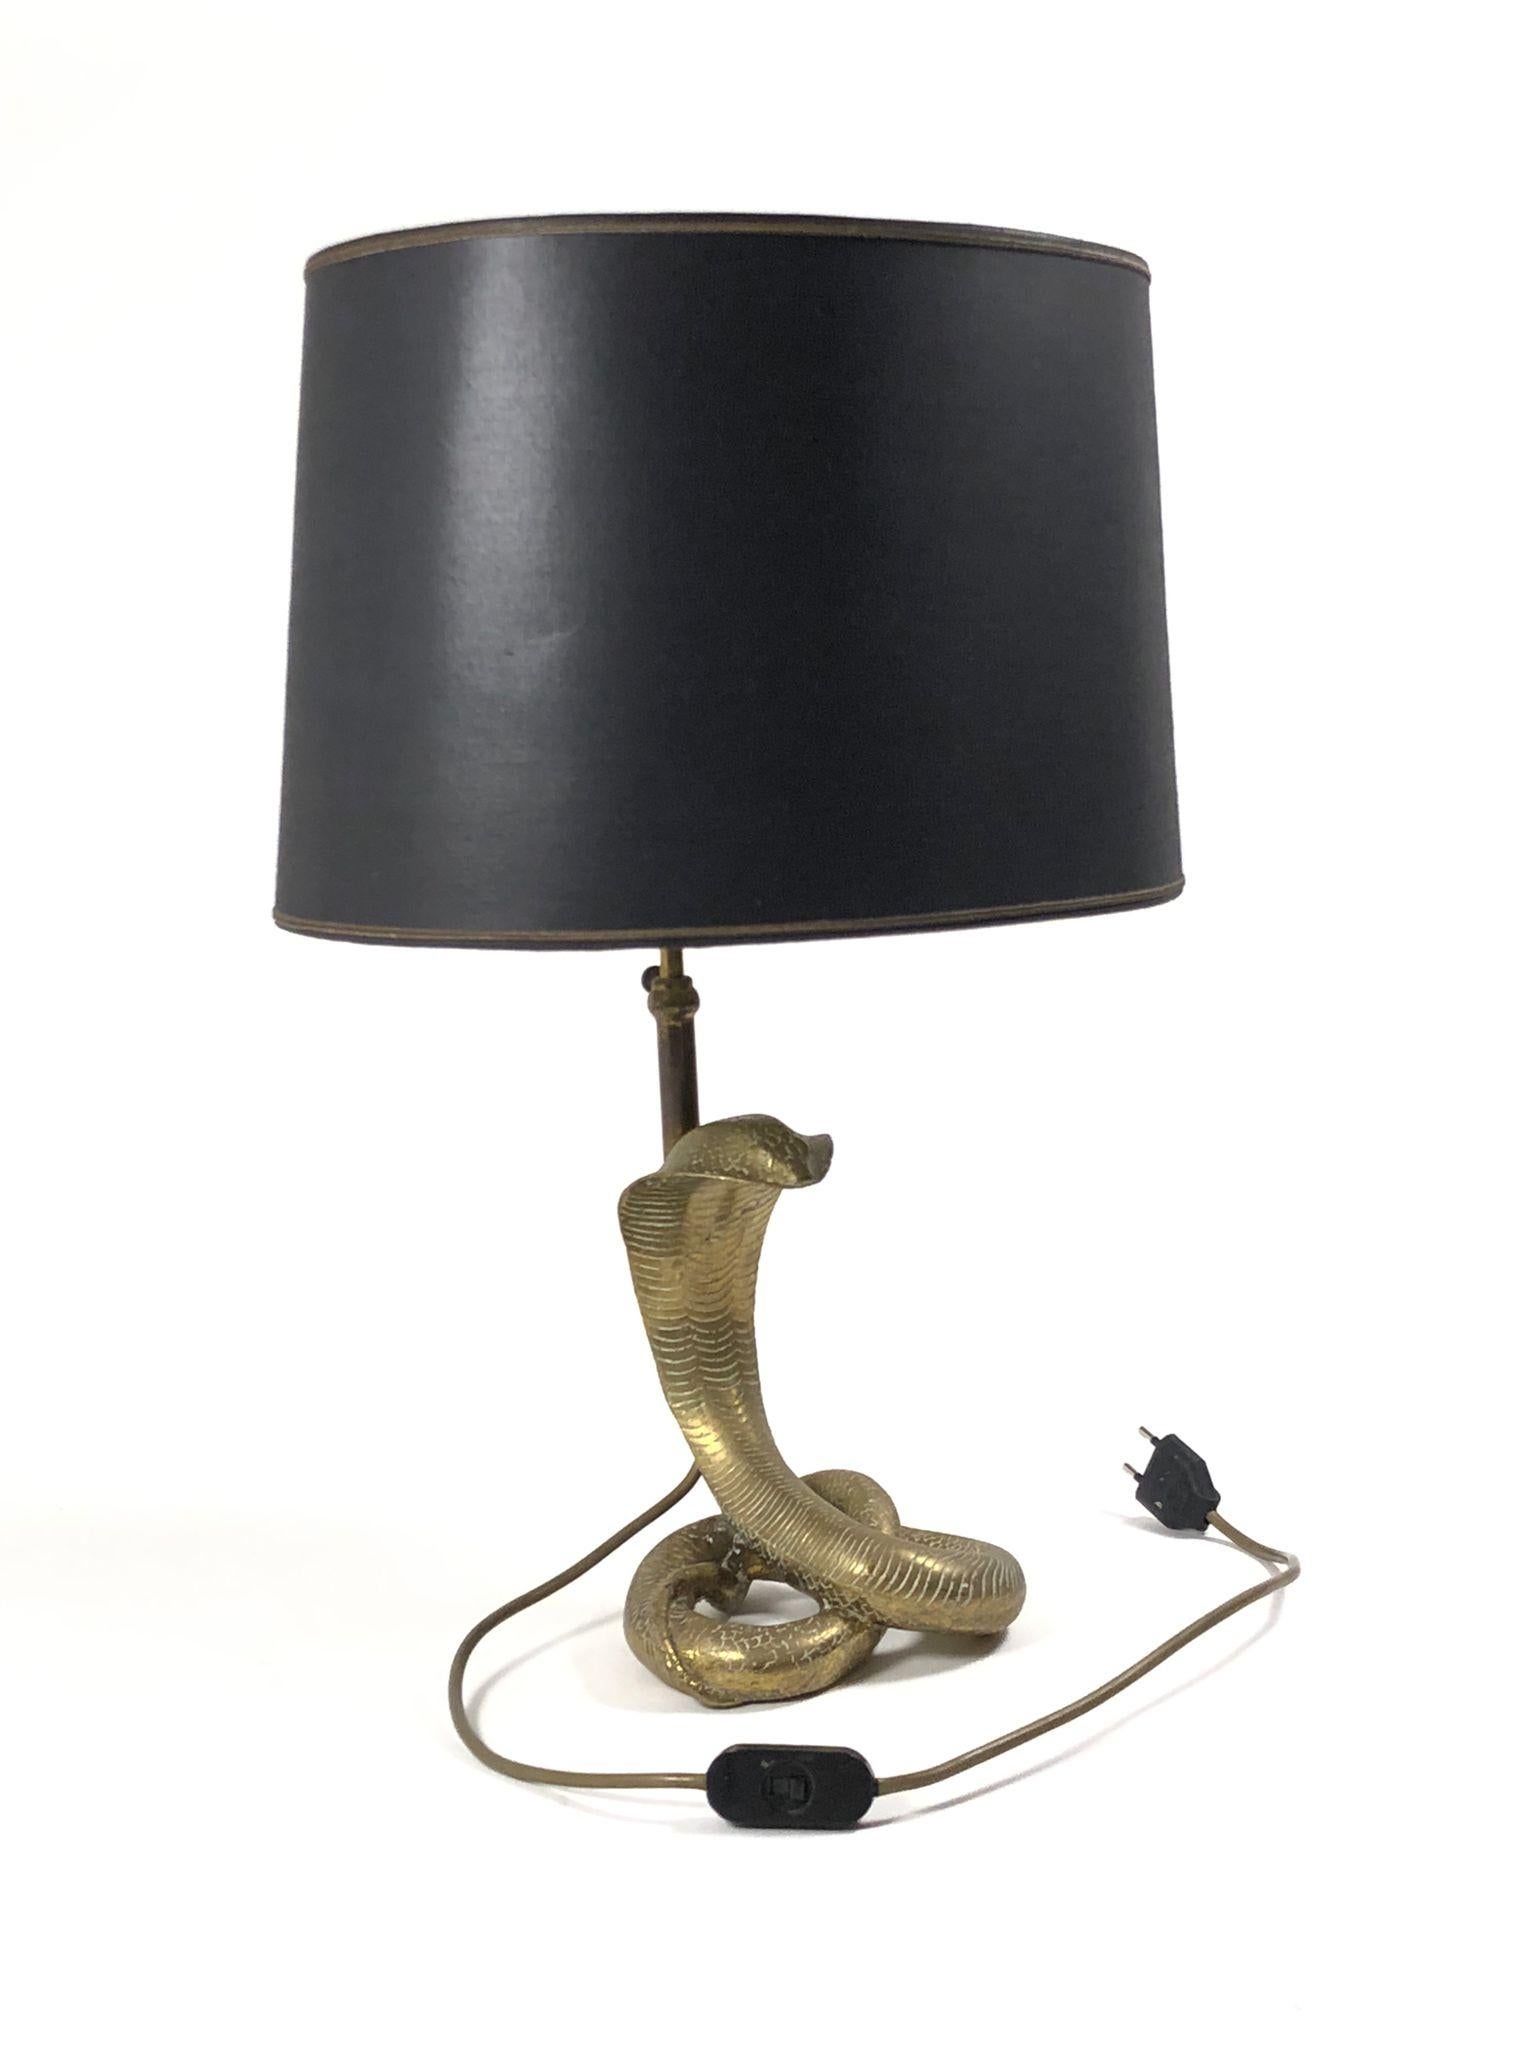 Rare vintage robust Cobra themed table lamp.

New wide black lamp shade with gold interior. 

Fully functioning lamp.

Minor sign of wear. No structural damage or chips. 

Measures: 21 cms cobra height 
15 cms cobra base.


